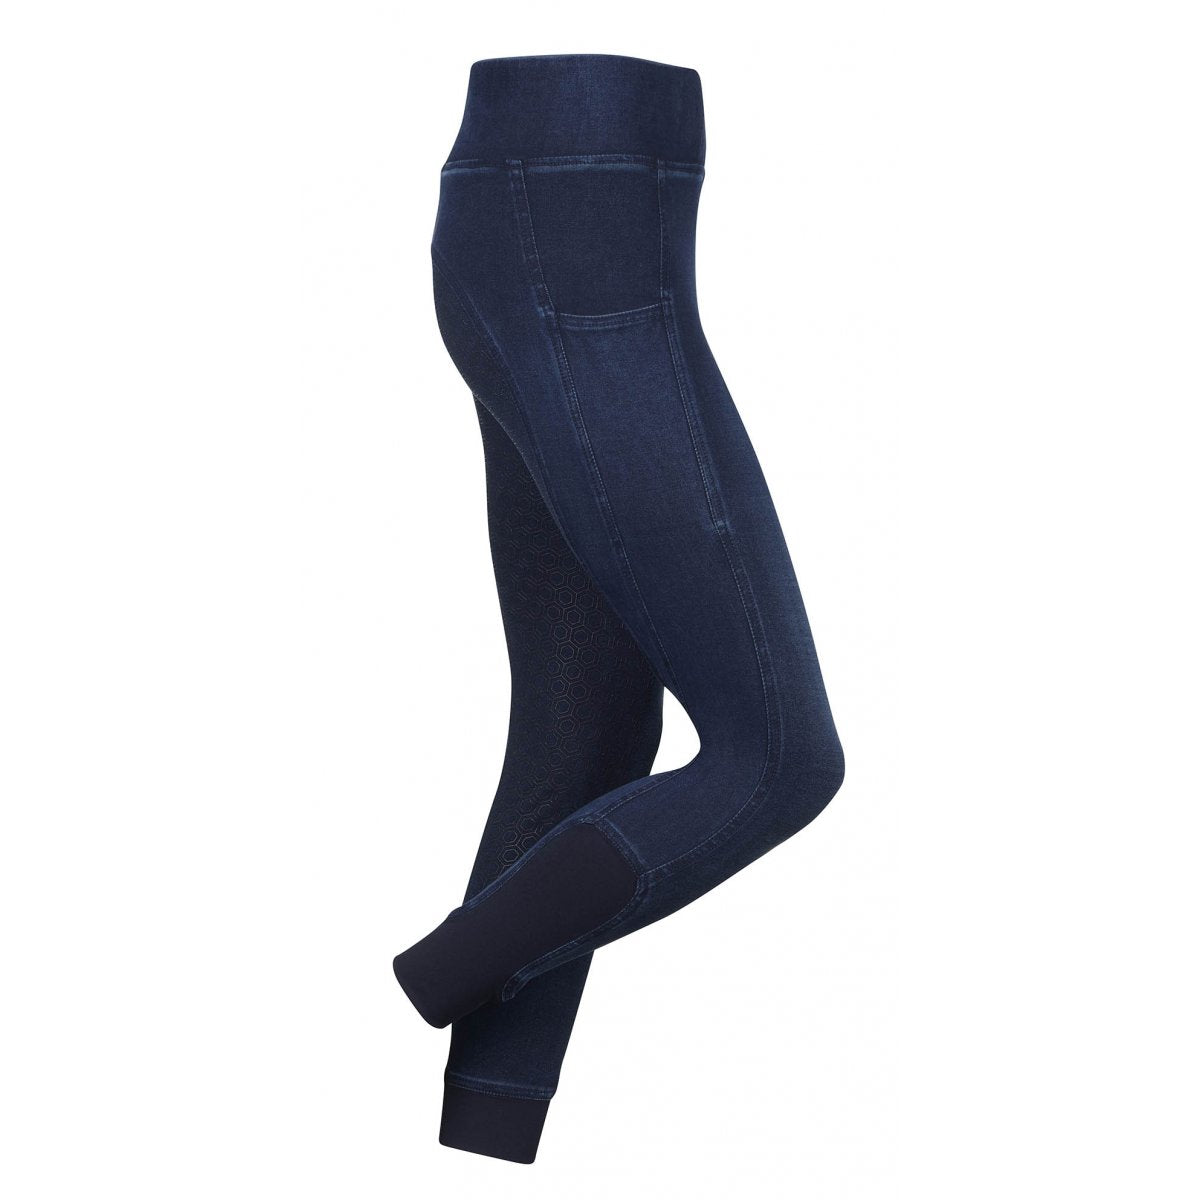 Navy blue horse riding tights with pockets and full seat detail.